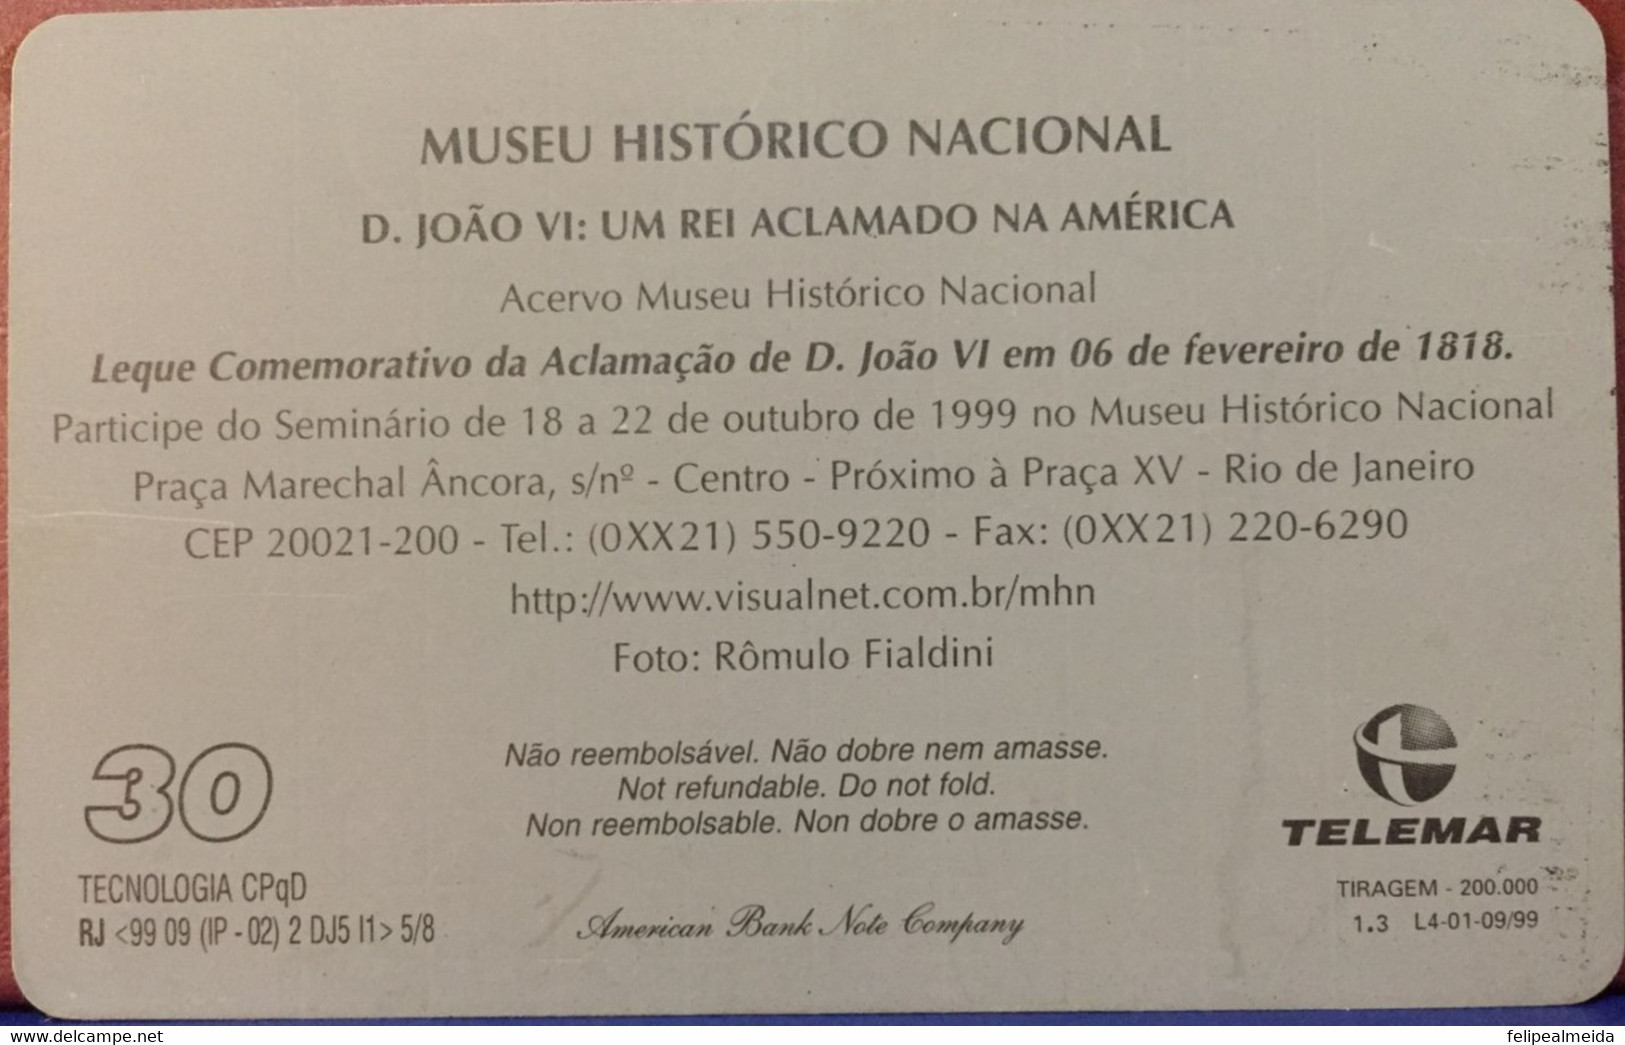 Phone Card Manufactured By Telebrasr In 1997 - Series Museu Historico Nacional - Photo Fan Commemorating The Acclamation - Cultura